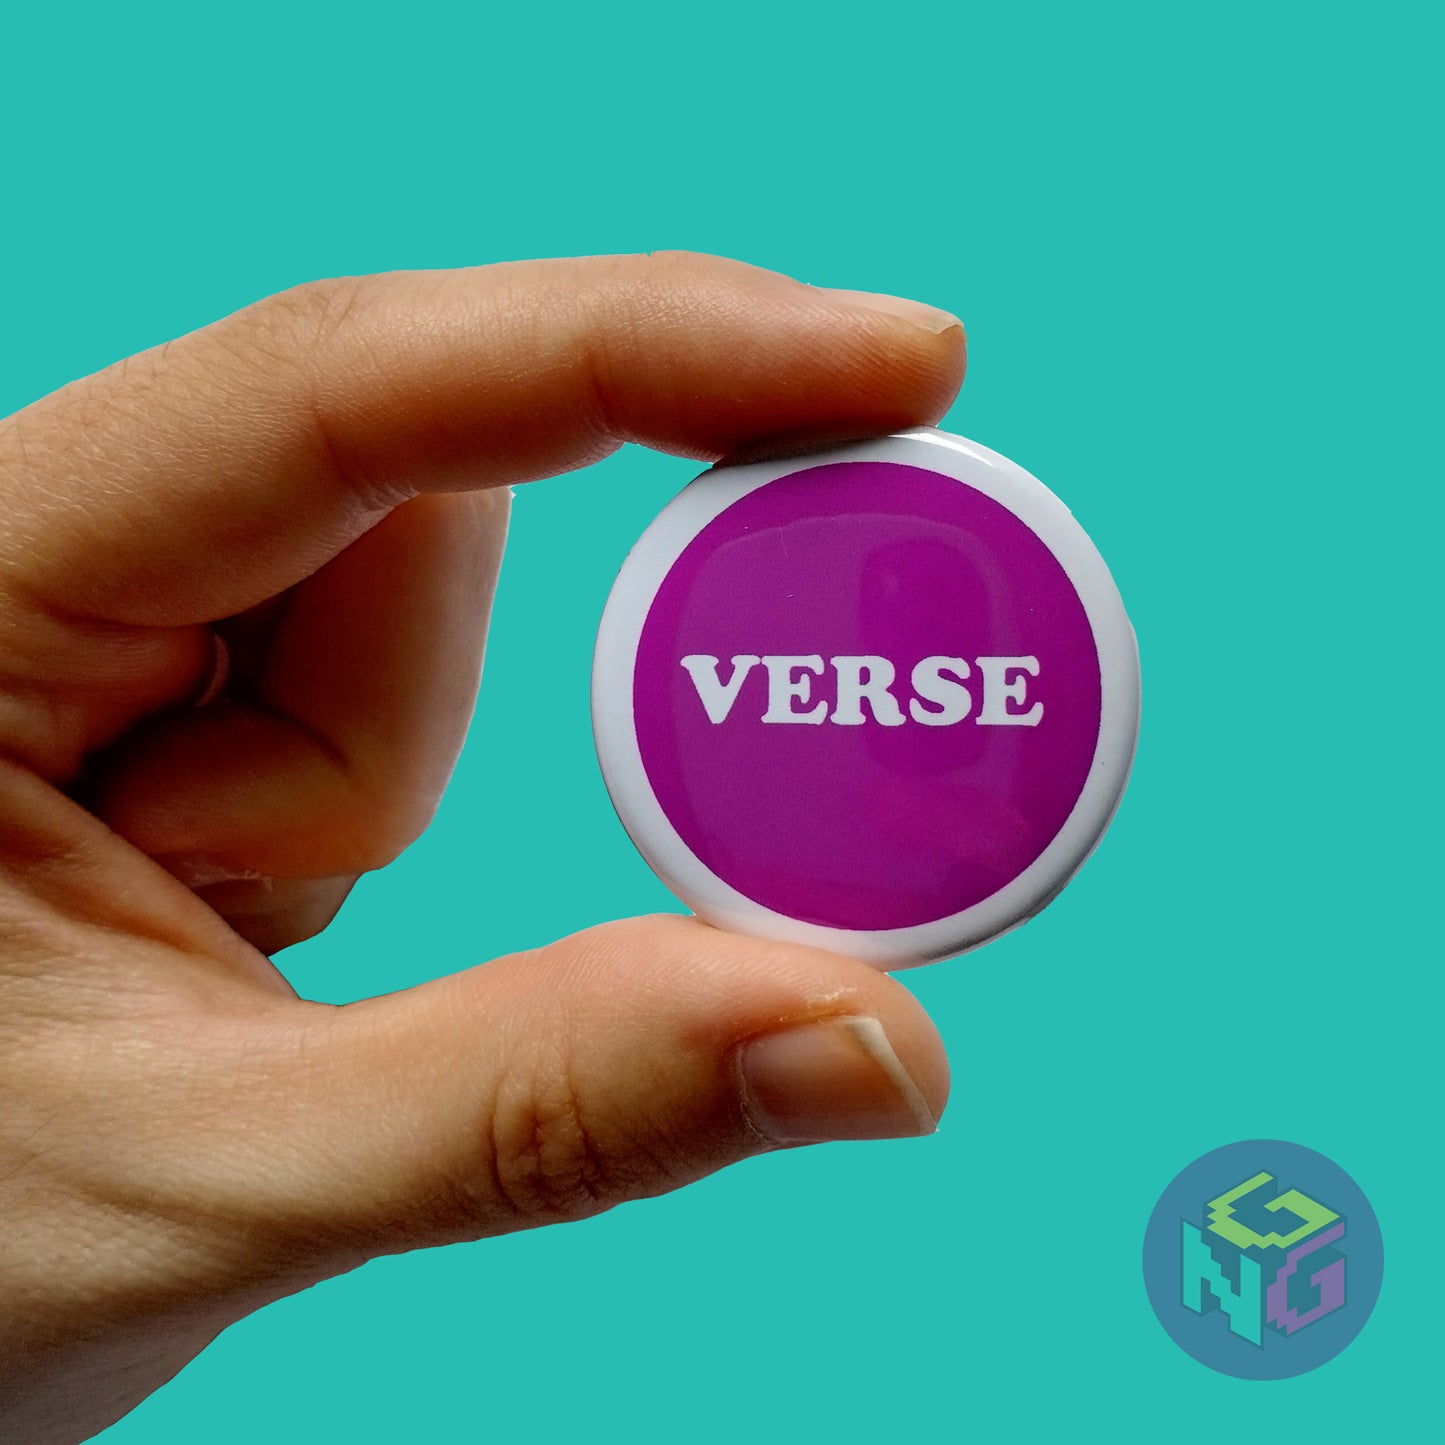 purple verse pin held in a hand in front of a mint green background